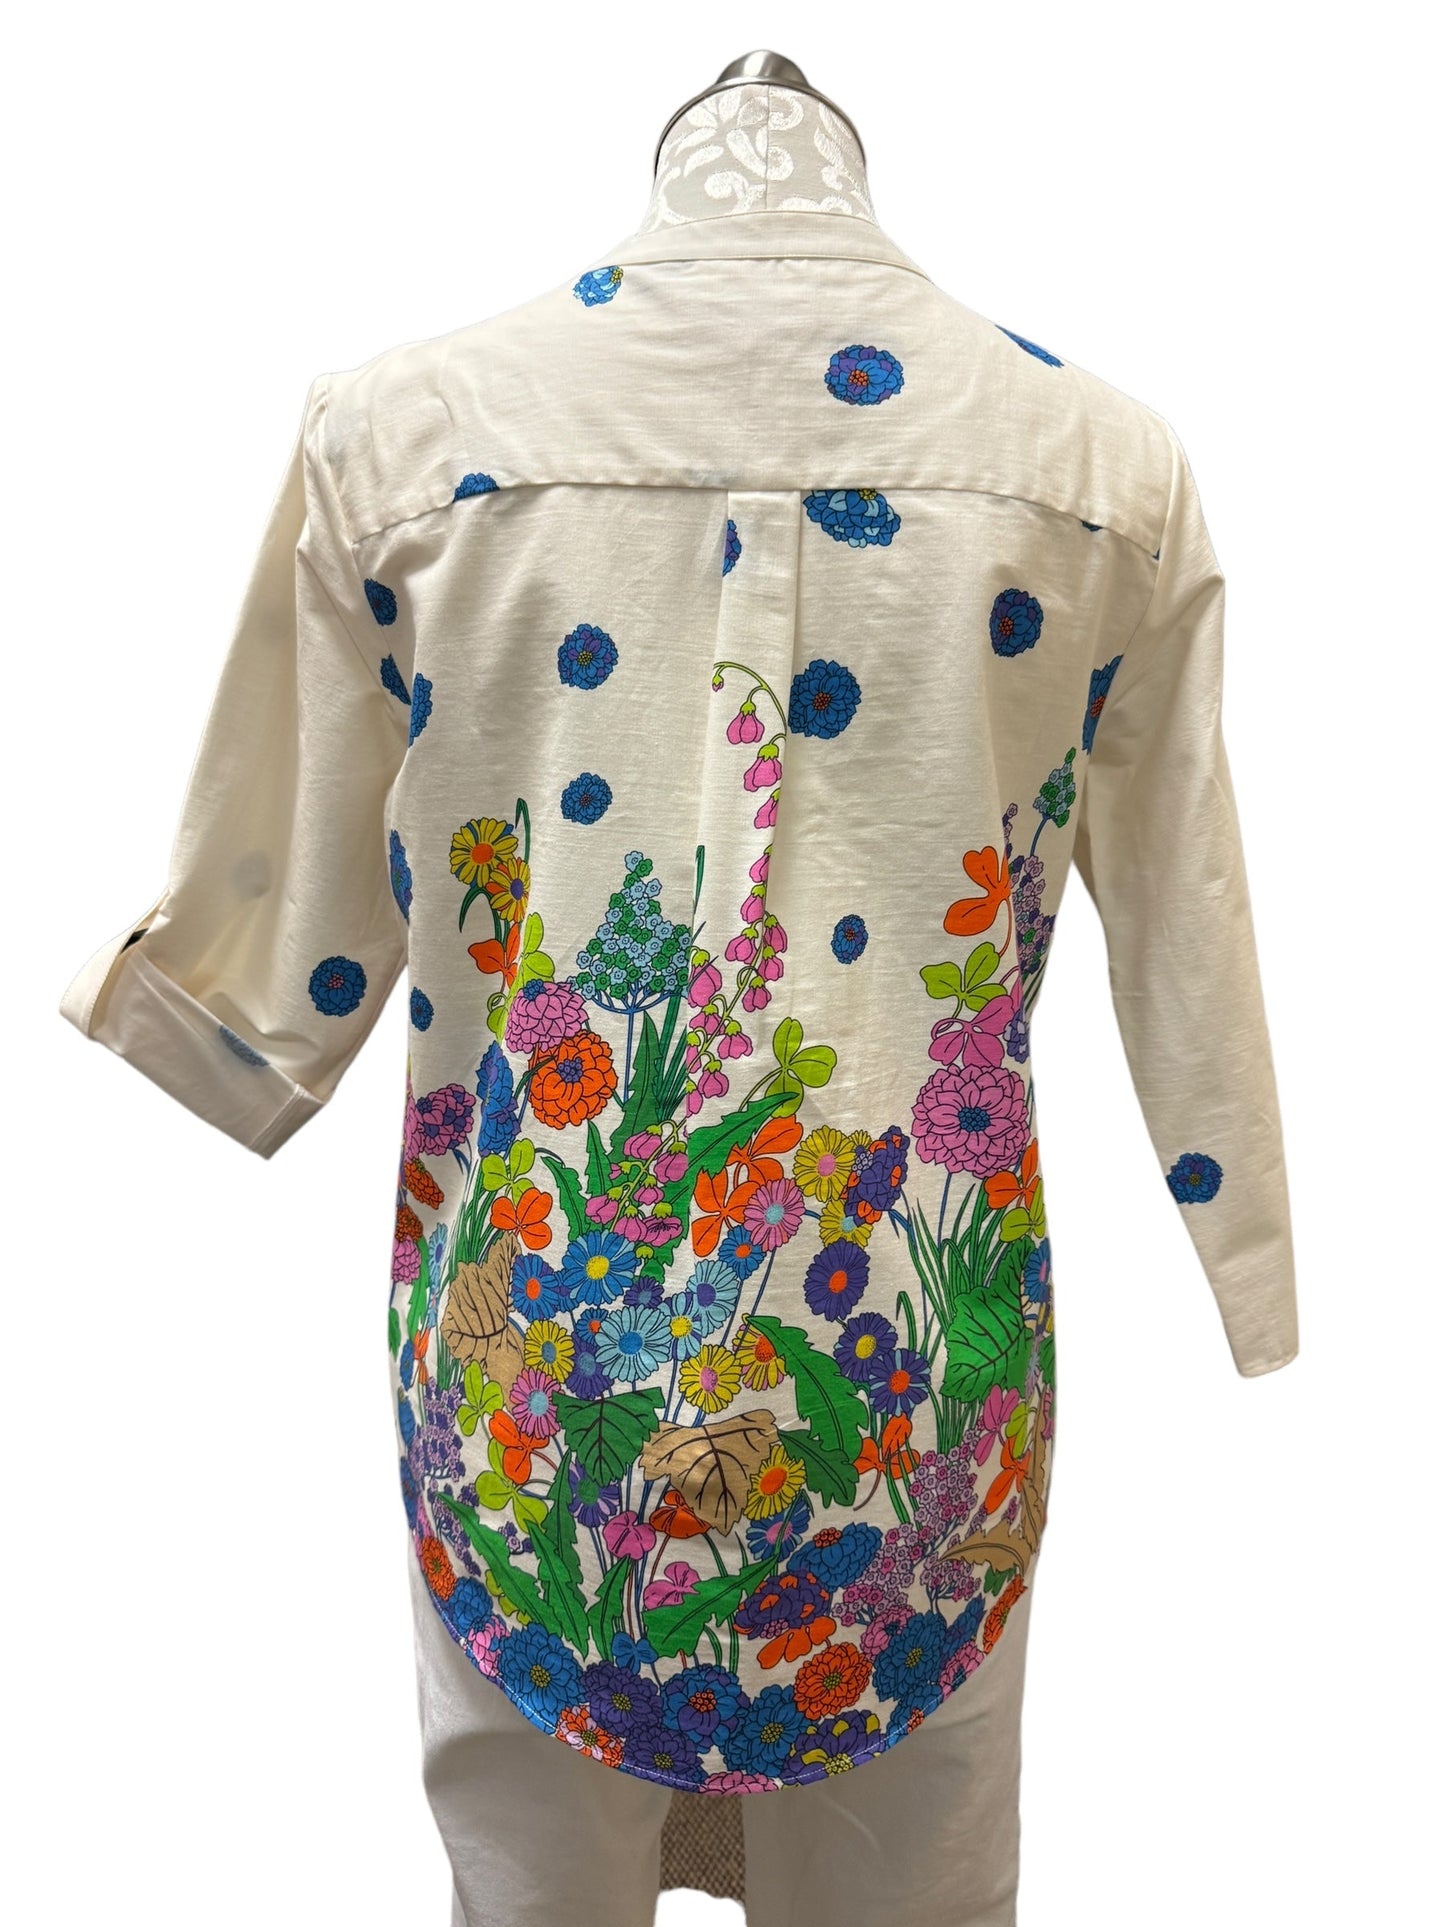 Floral Print Top 3/4 Sleeve Viila Gallo, Size 10